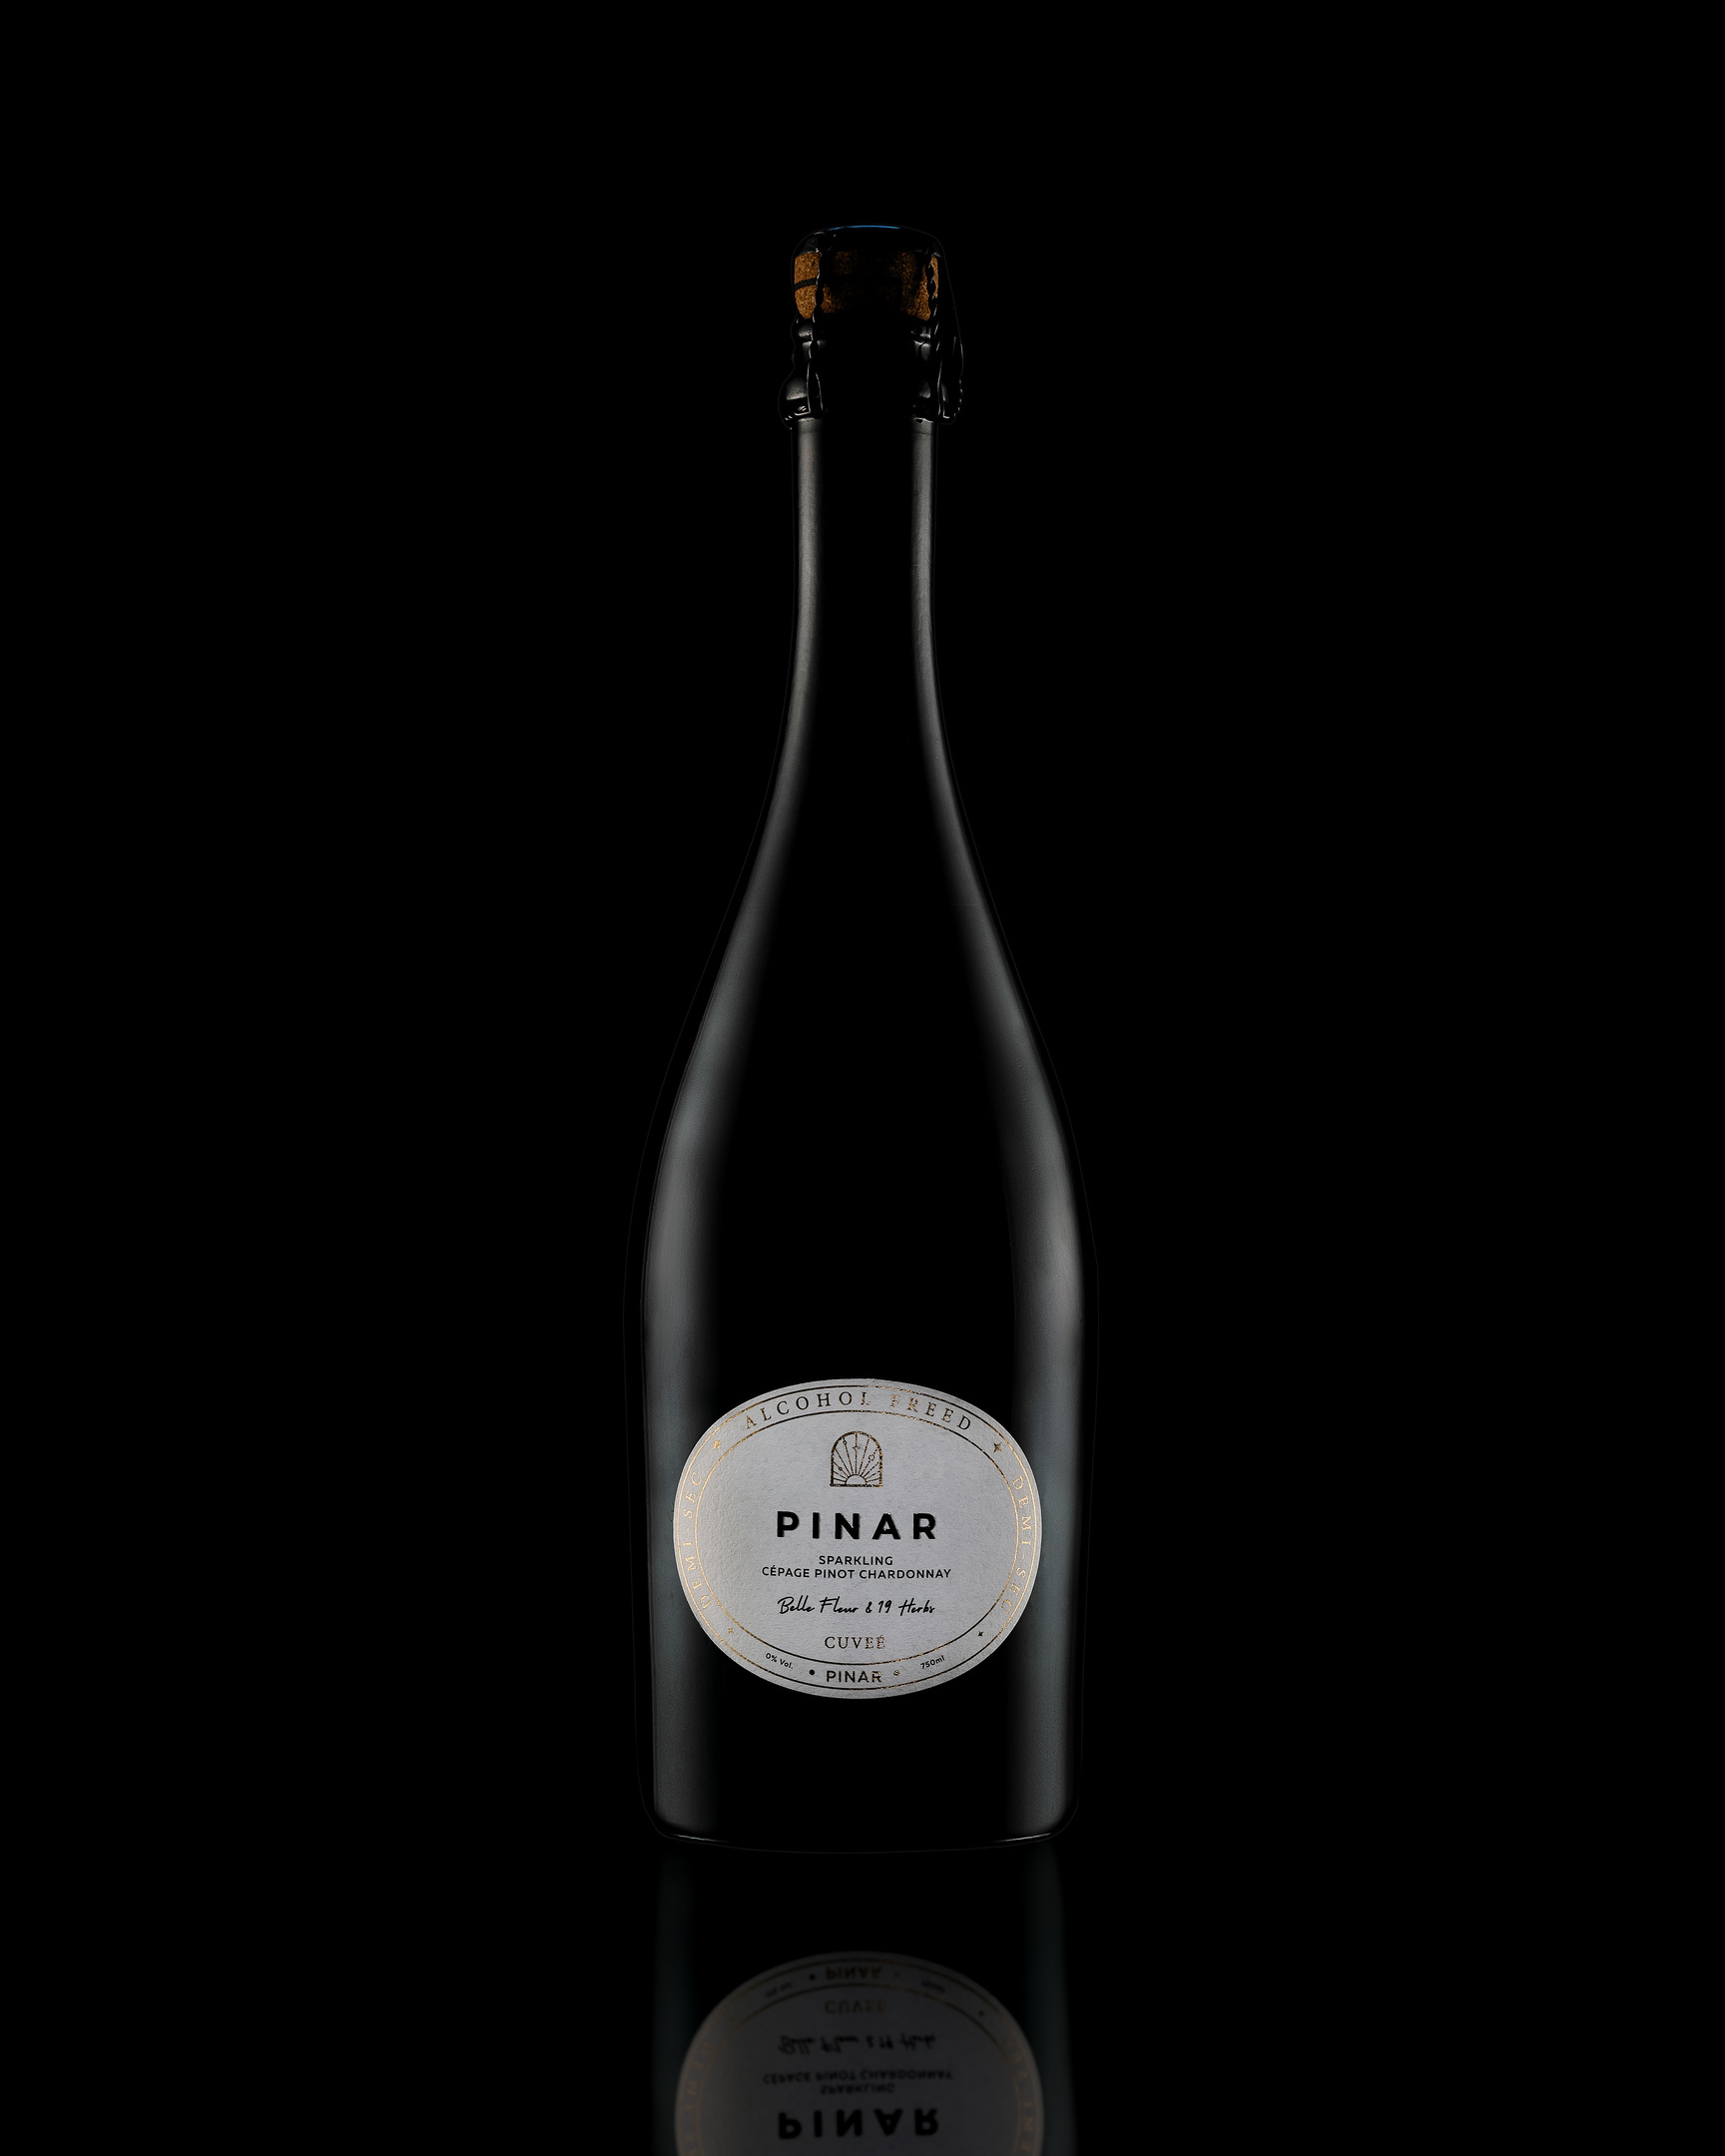 PINAR - Sparkling Cepage Pinot Chardonnay. A bottle of alcohol-freed (0%) wine PINAR with shadows and reflection on a black background.